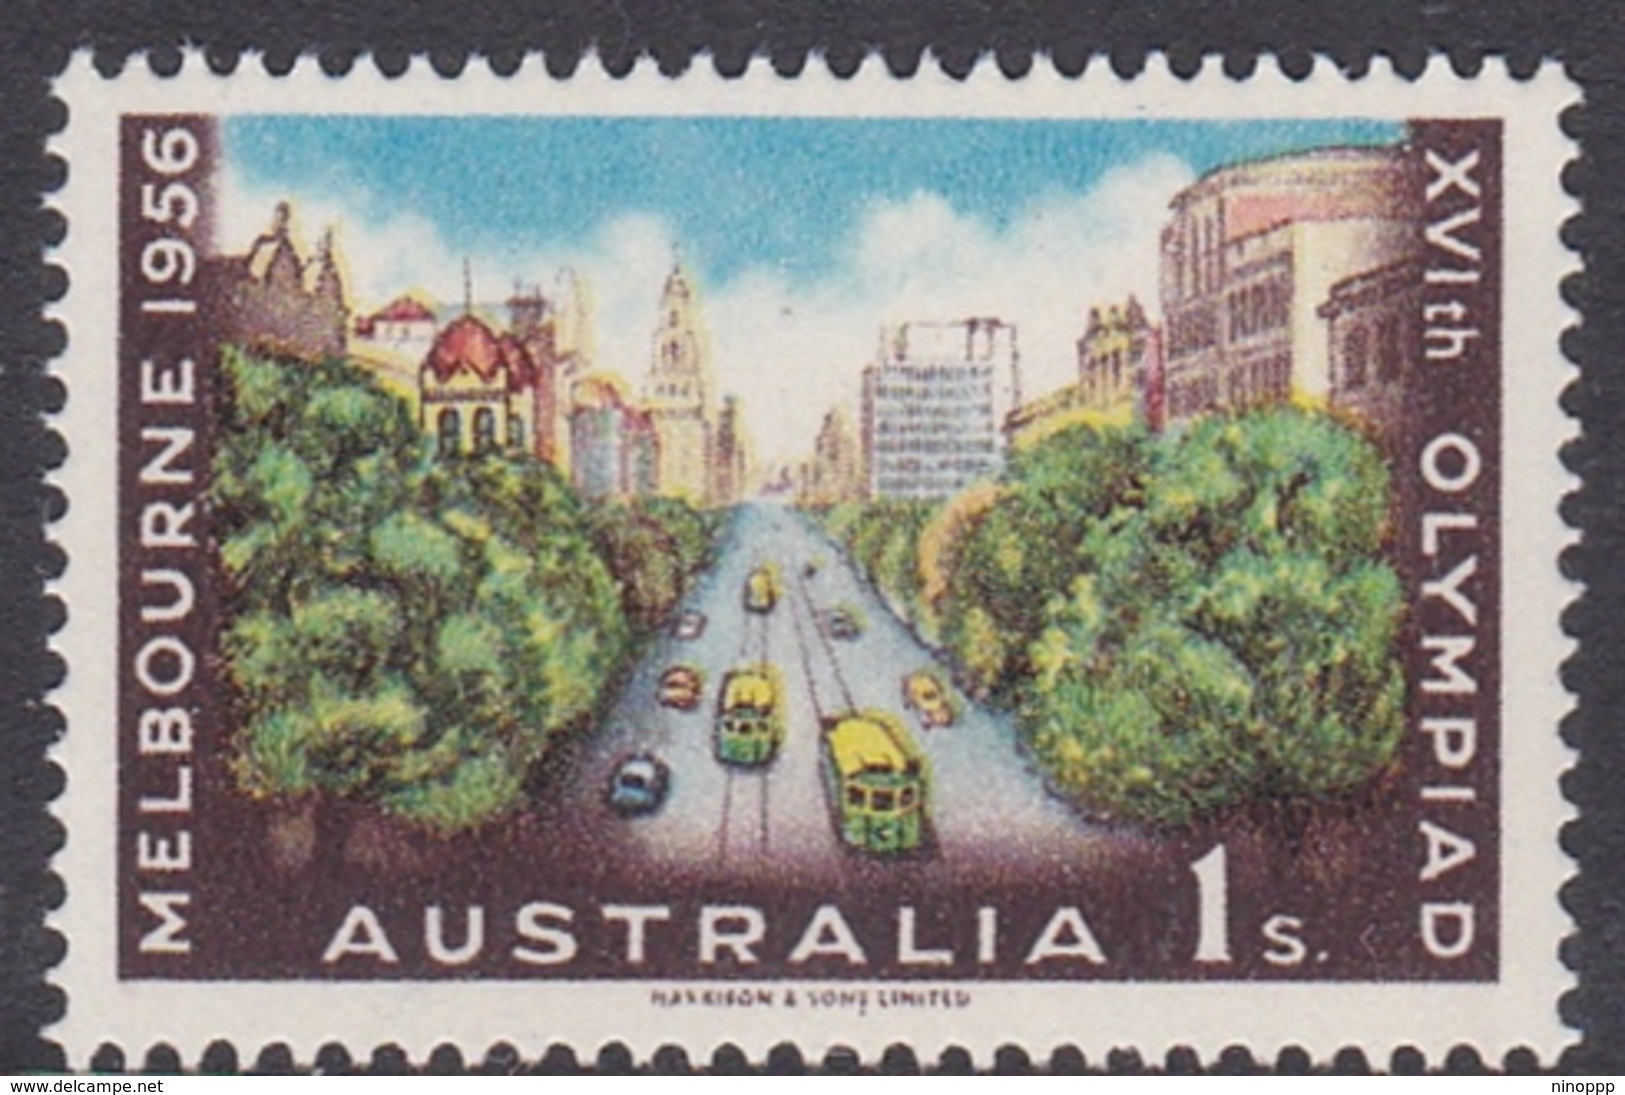 Australia ASC 328 1956 Olympic Games One Shilling Collins St, Mint Never Hinged - Mint Stamps